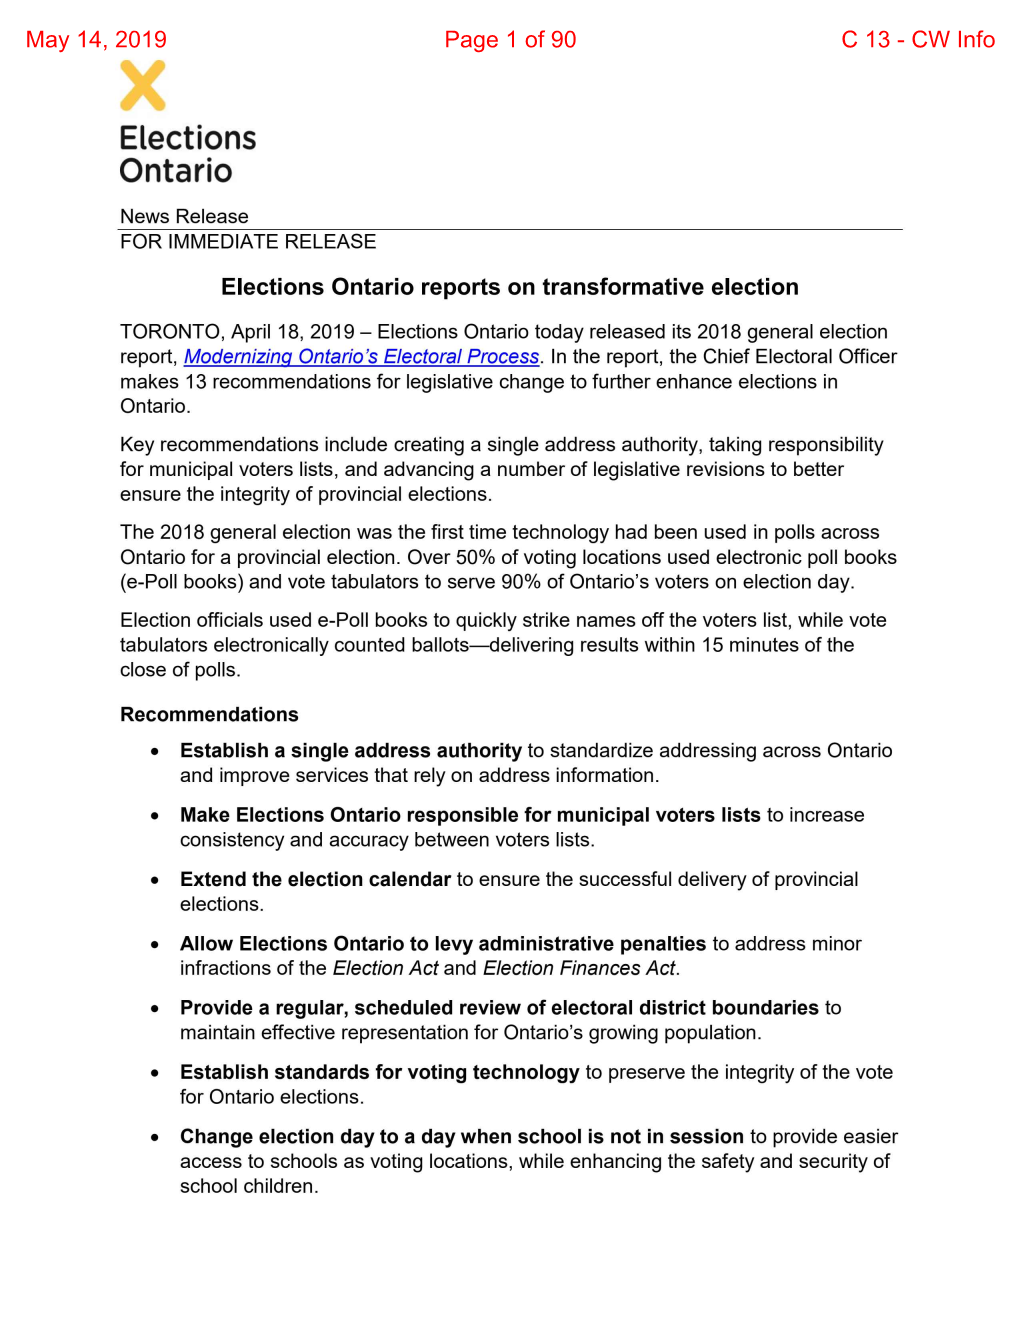 Elections Ontario Reports on Transformative Election